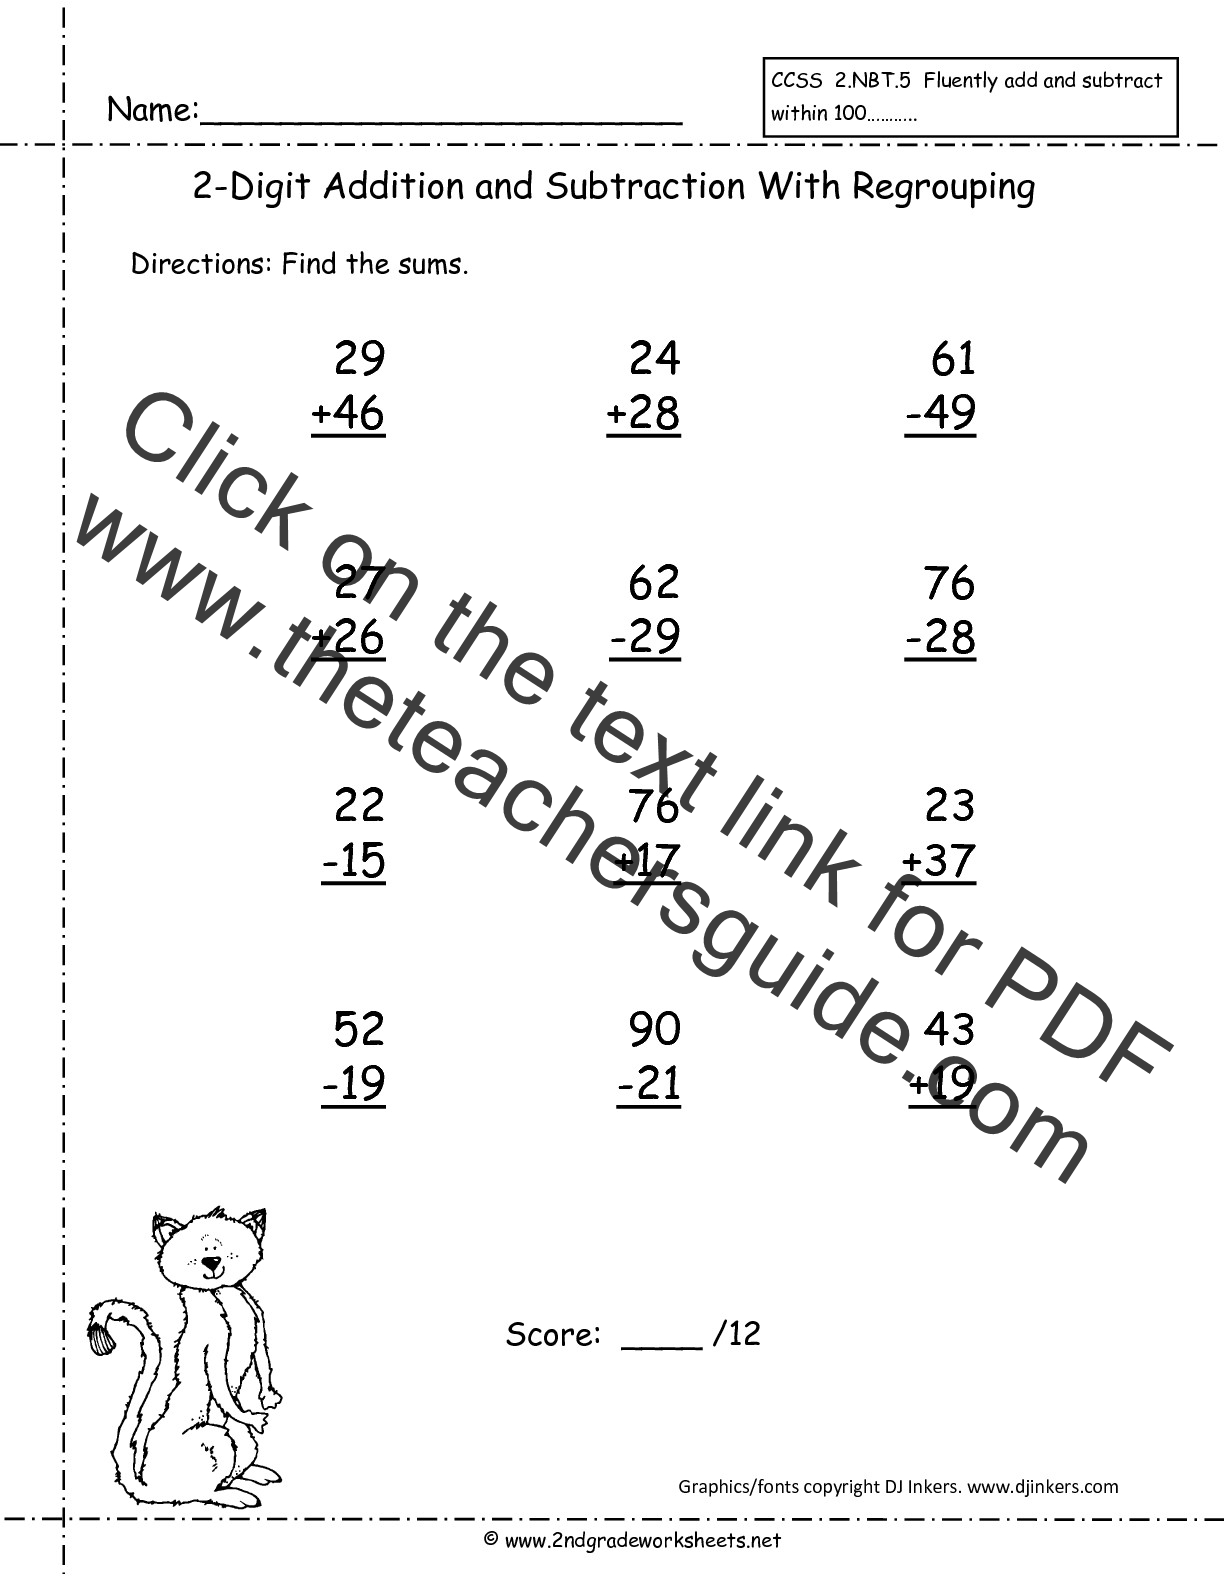 subtraction-without-regrouping-worksheets-2nd-grade-subtraction